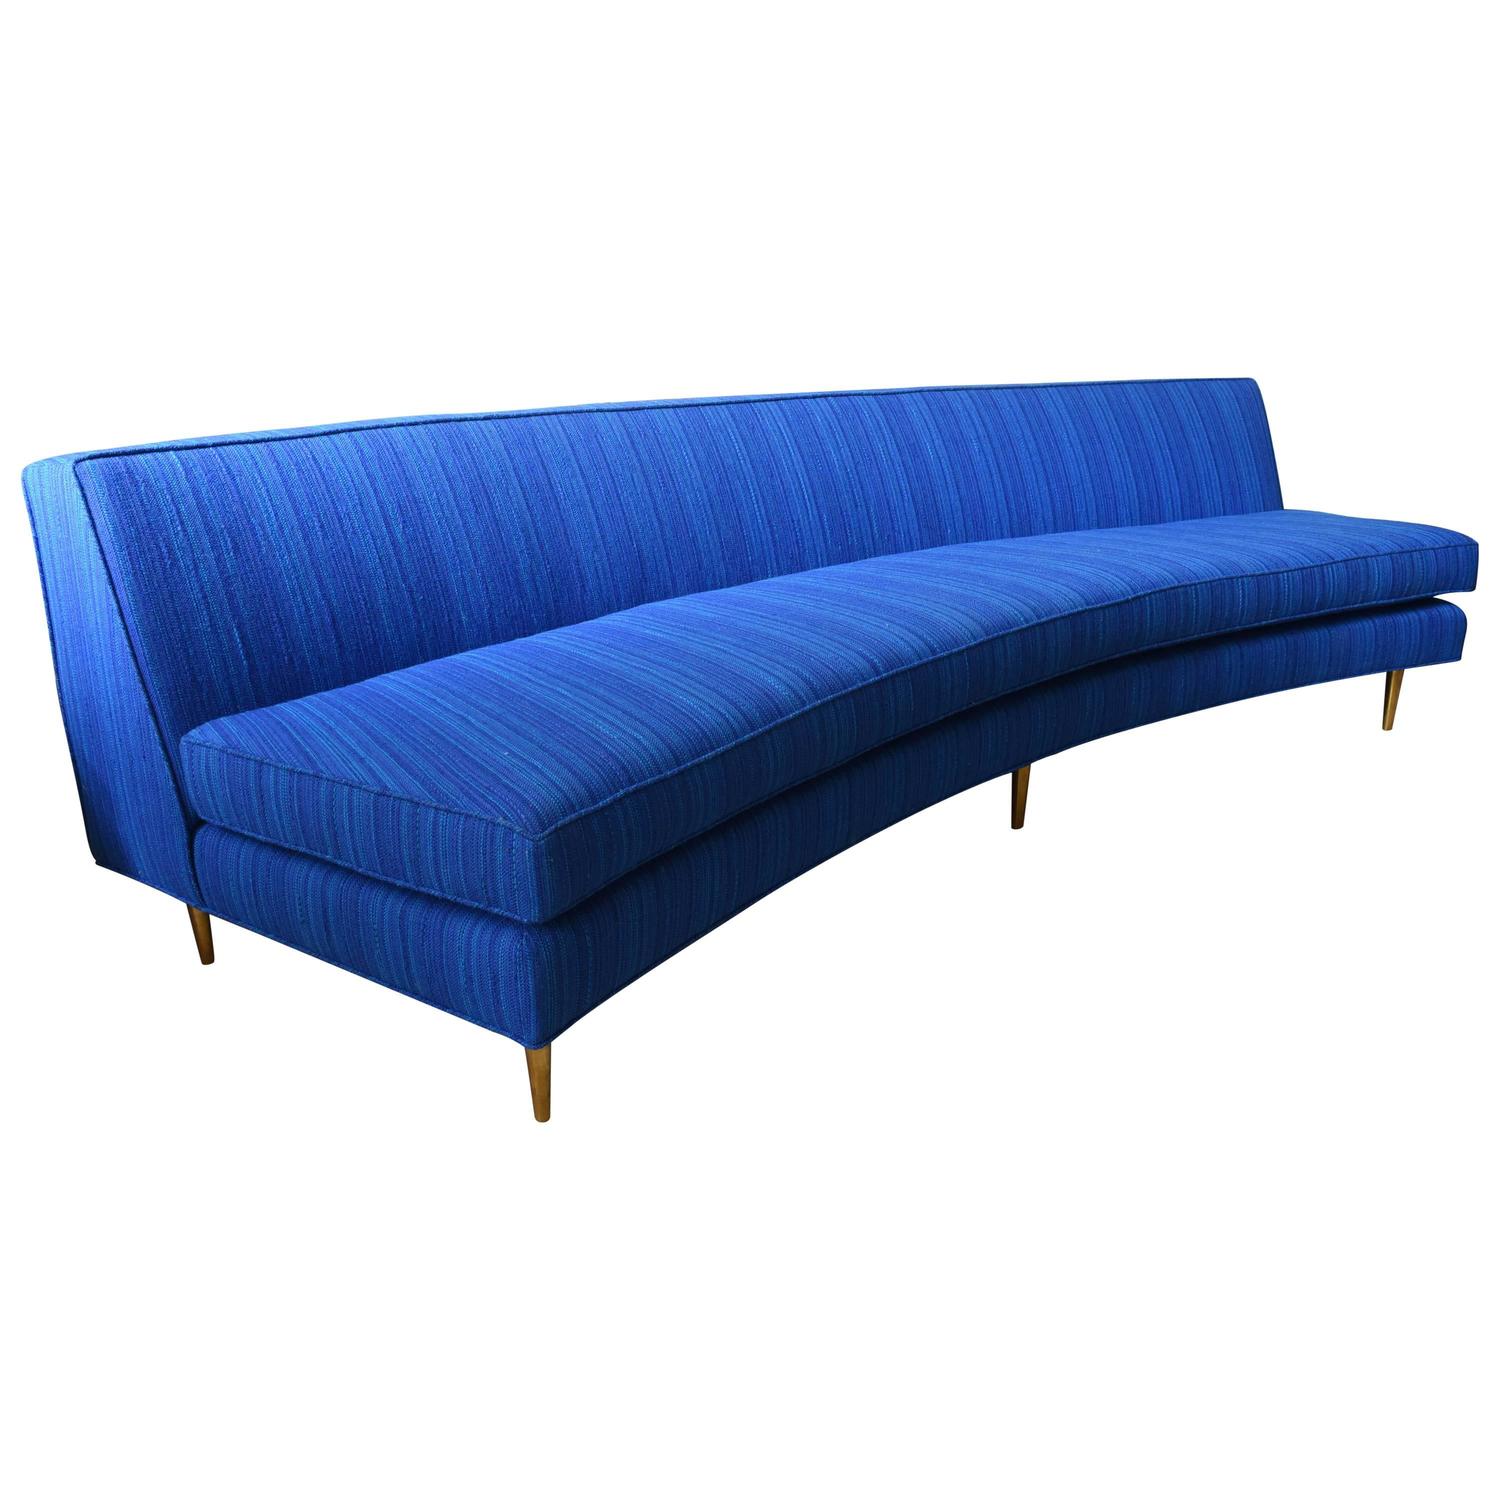 Mid-Century Modern Harvey Probber Curved Sofa Brass Legs For Sale at 